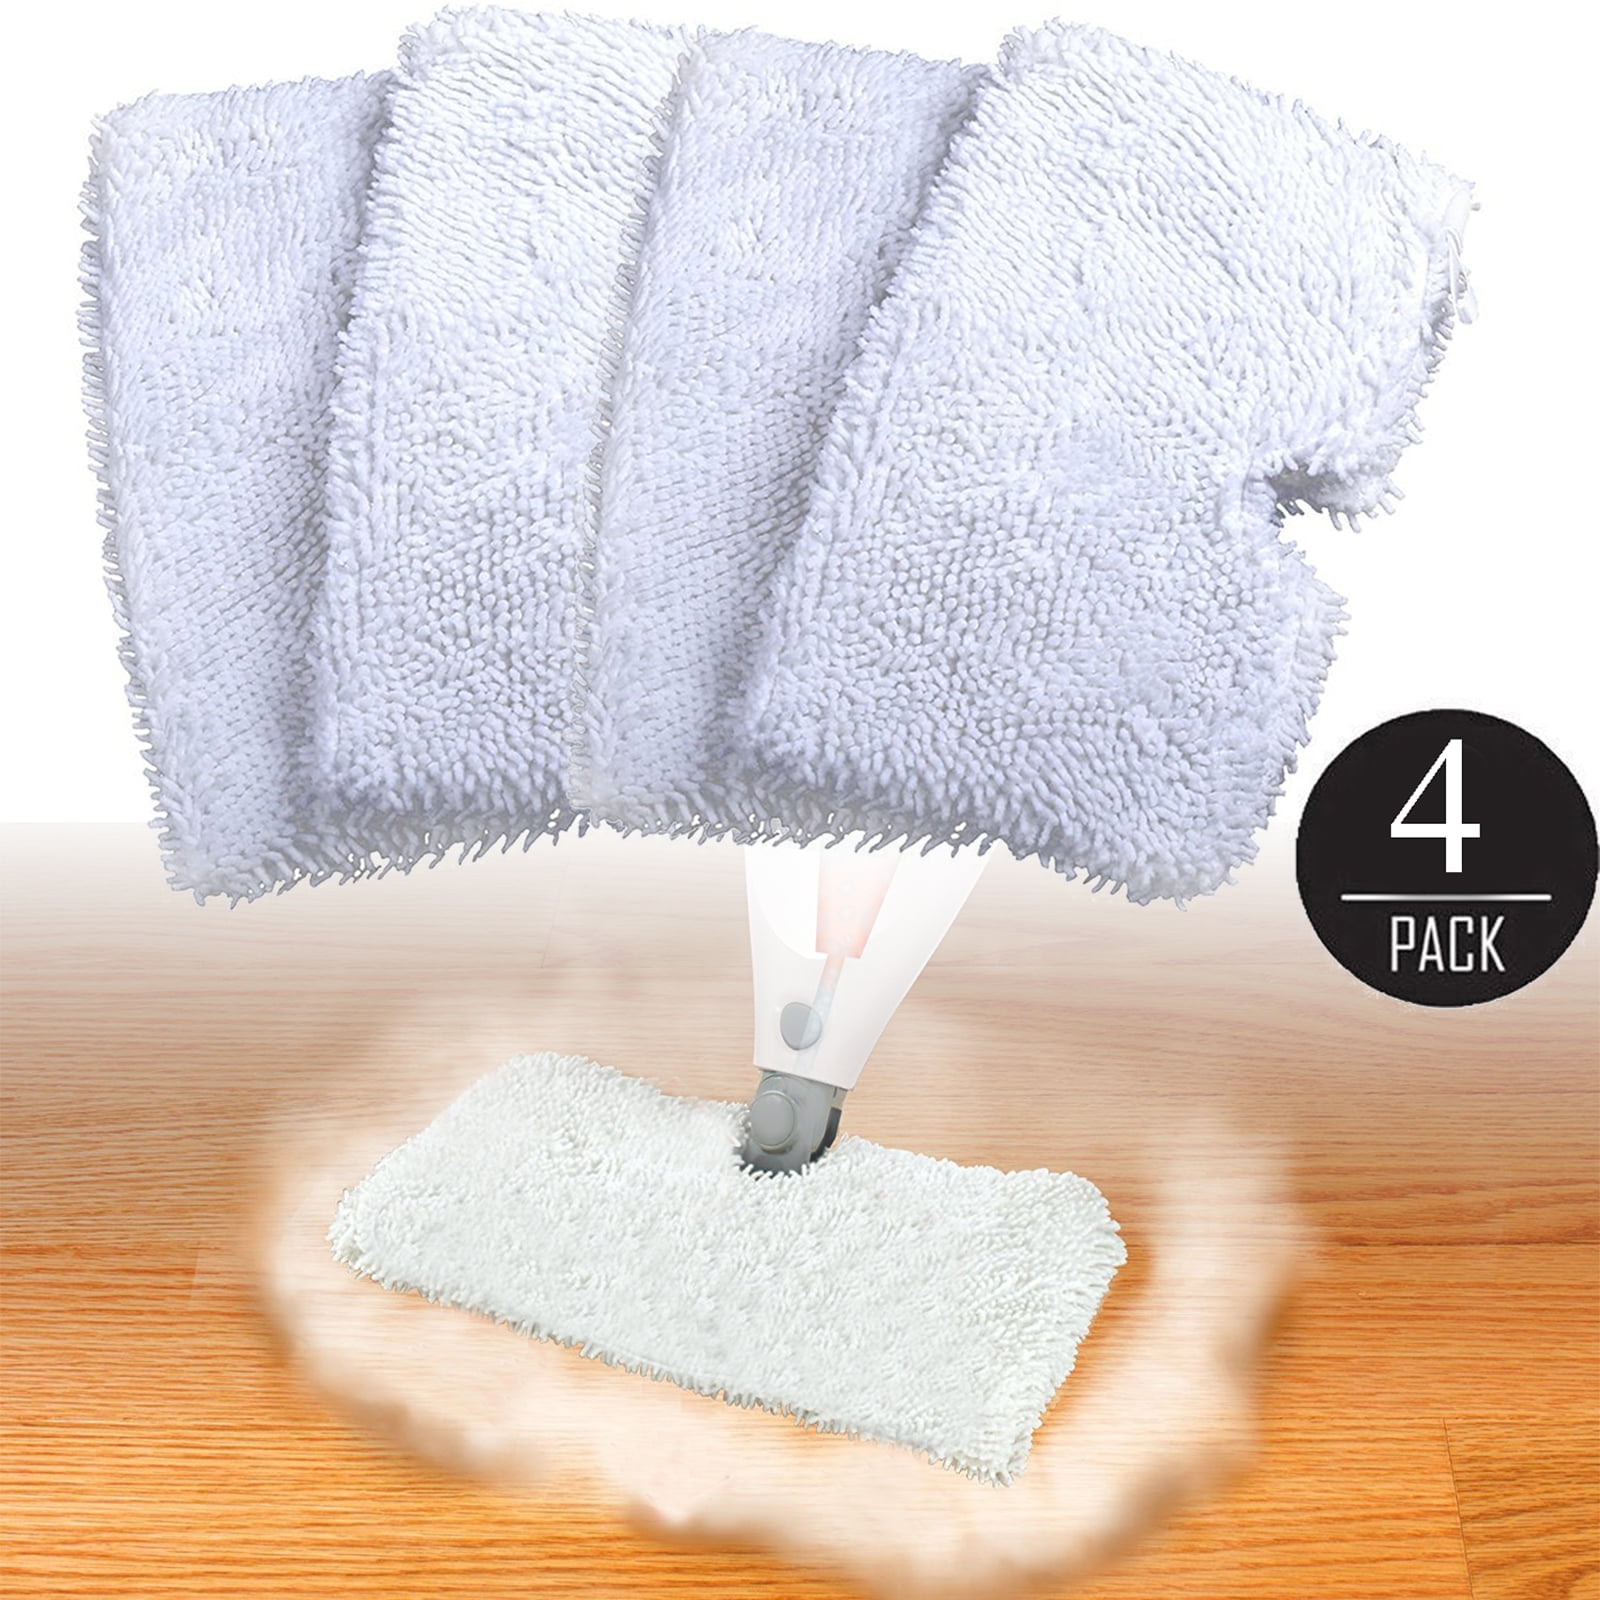 3 Pcs Steam Mop Pads Microfiber Replacement Pad for Shark S3973 S5003D S6001W 